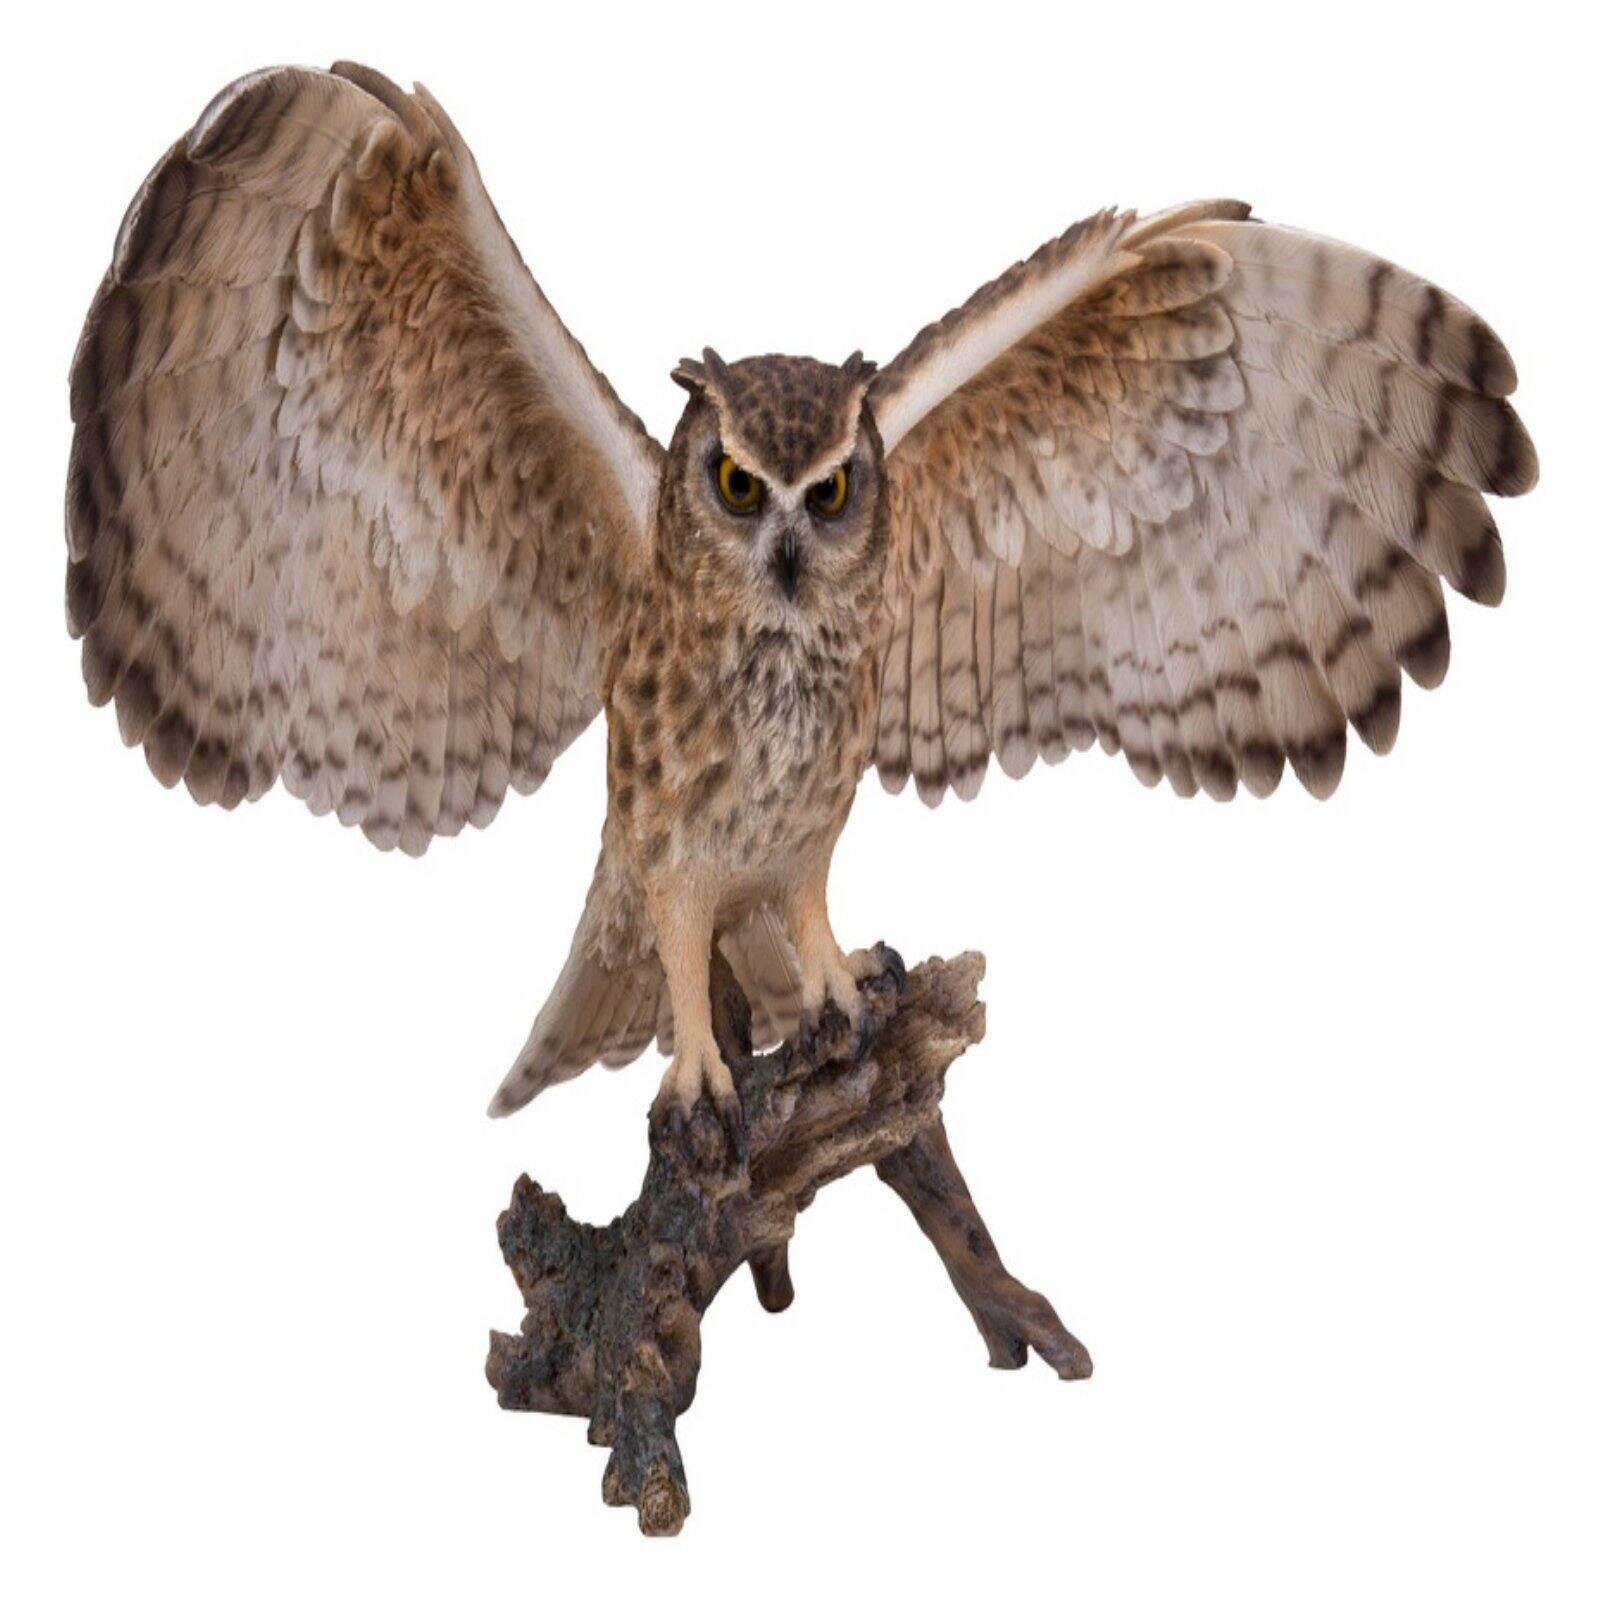 HI-LINE GIFT LTD. EAGLE OWL ON BRANCH W/WINGS OUT - image 4 of 5